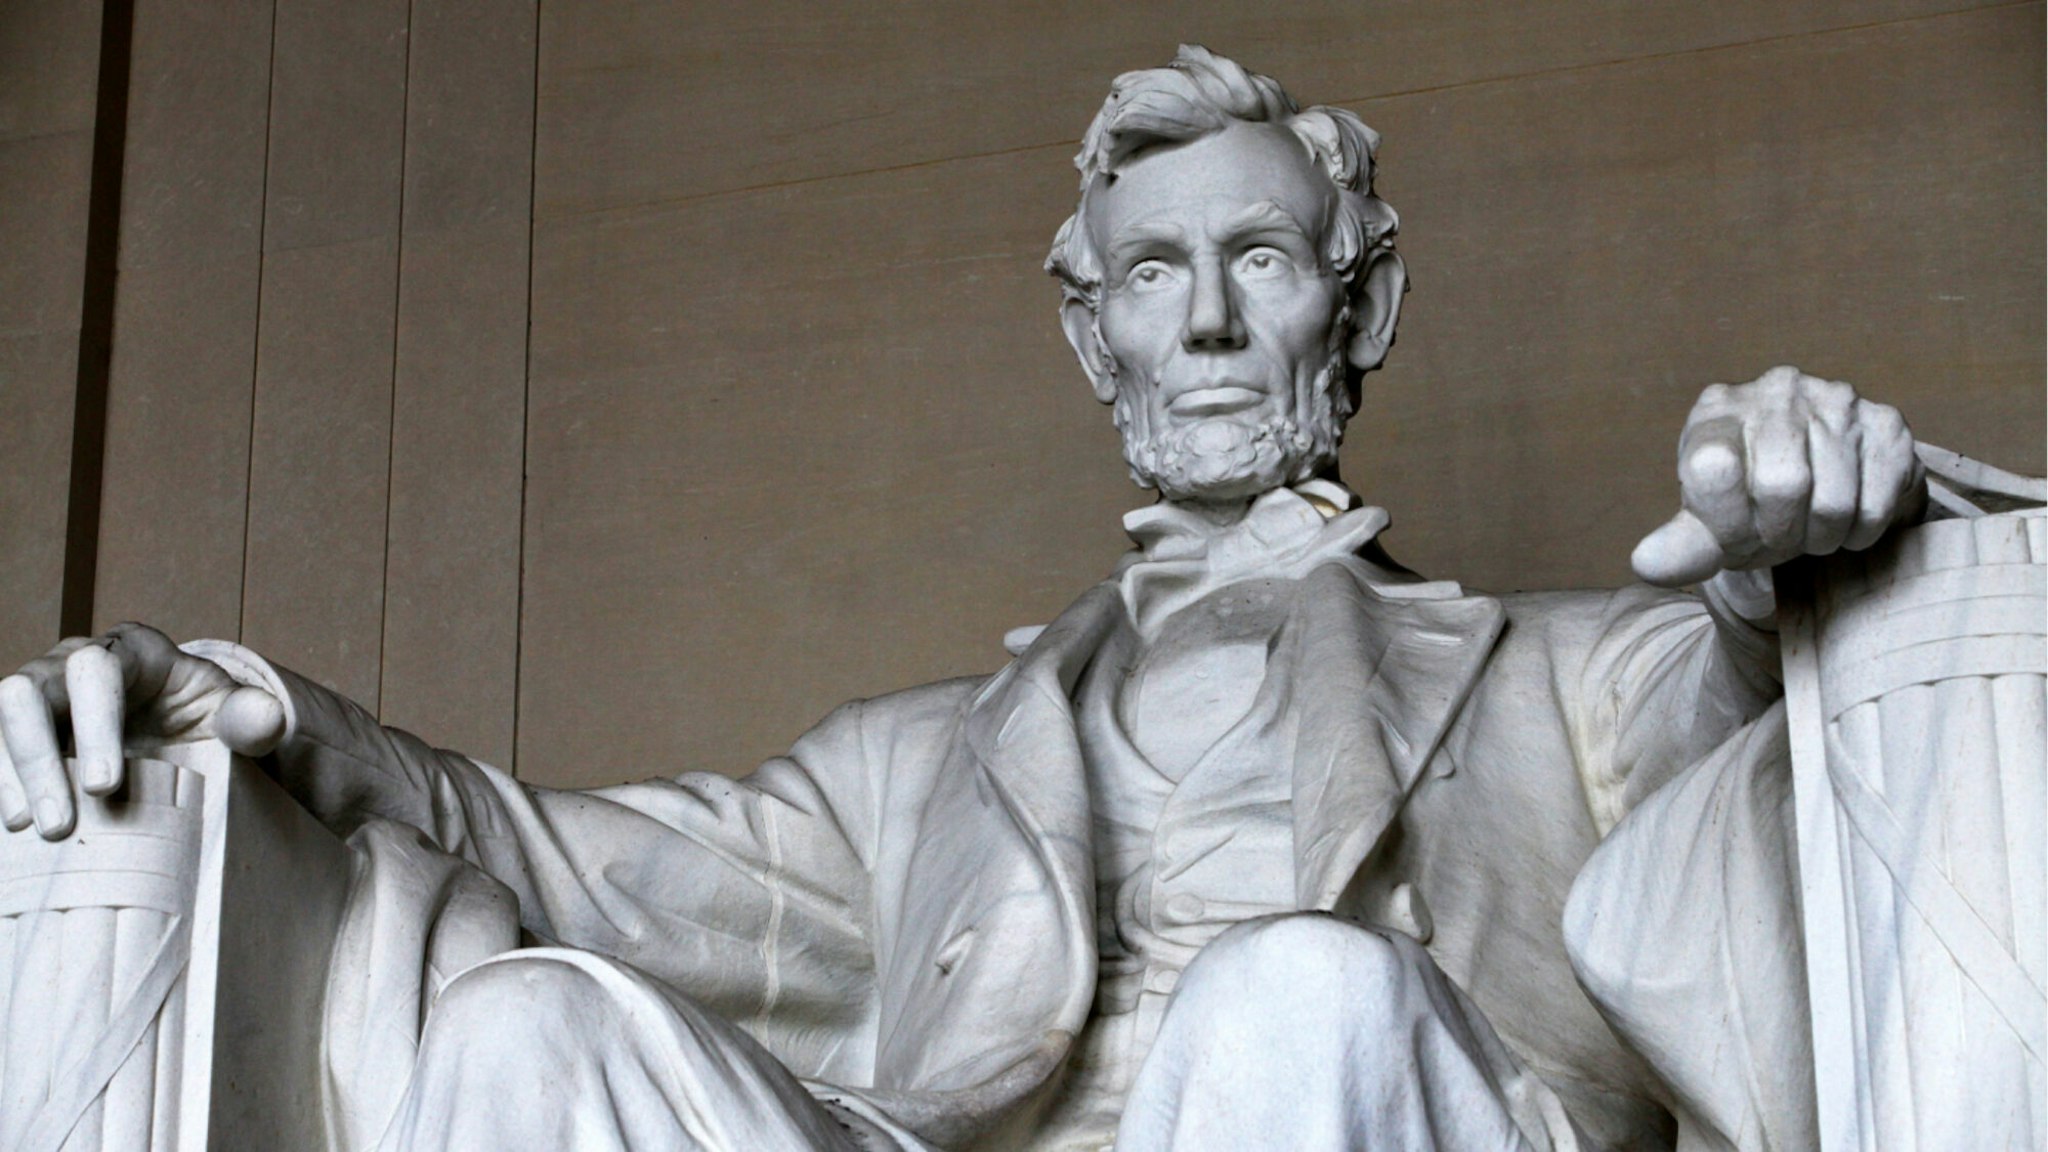 Abraham Lincoln statue sits inside the rotunda of the Lincoln Memorial on April 10, 2015 in Washington, D.C.